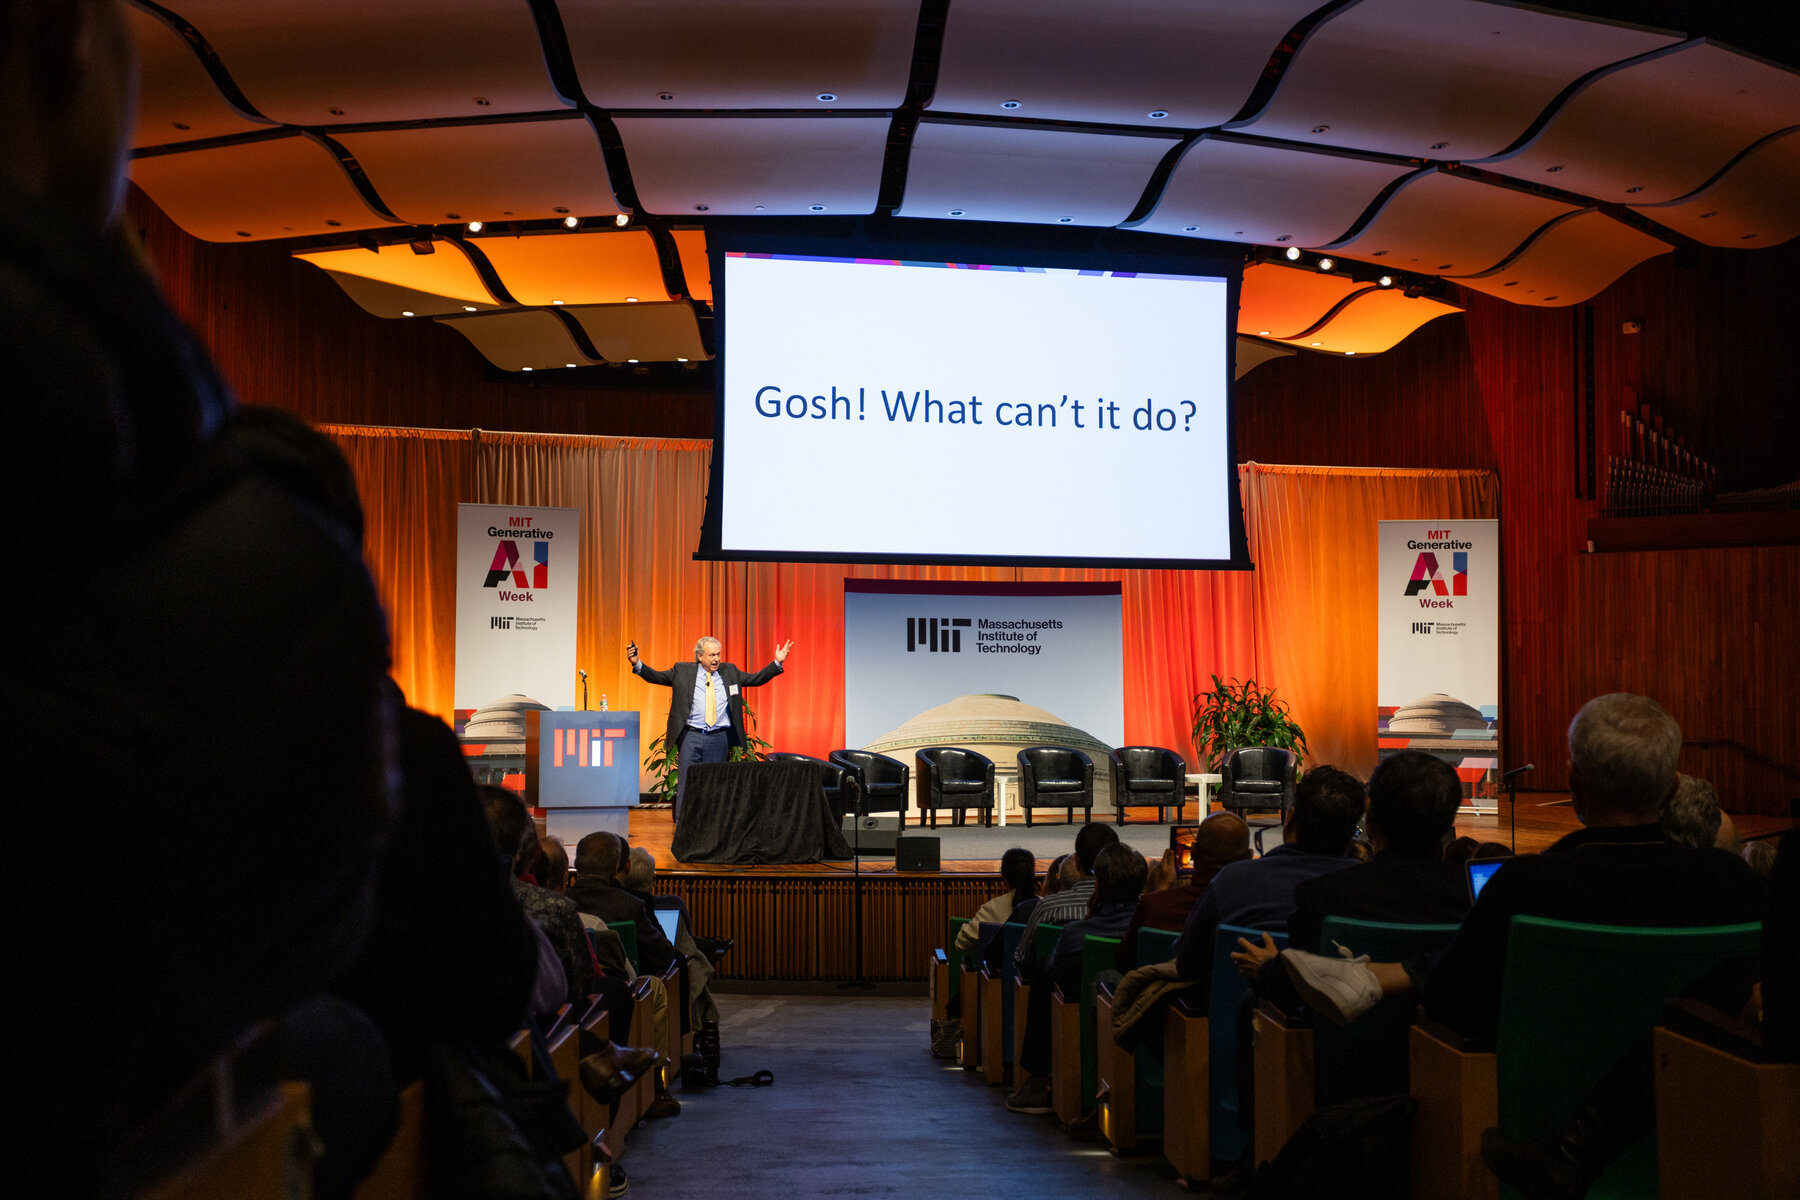 Figure 4. Rodney Brooks, co-founder of iRobot, warns attendees not to overestimate the capabilities of generative AI tools like OpenAI's ChatGPT at MIT Generative AI week. (Credit: Jake Belcher).